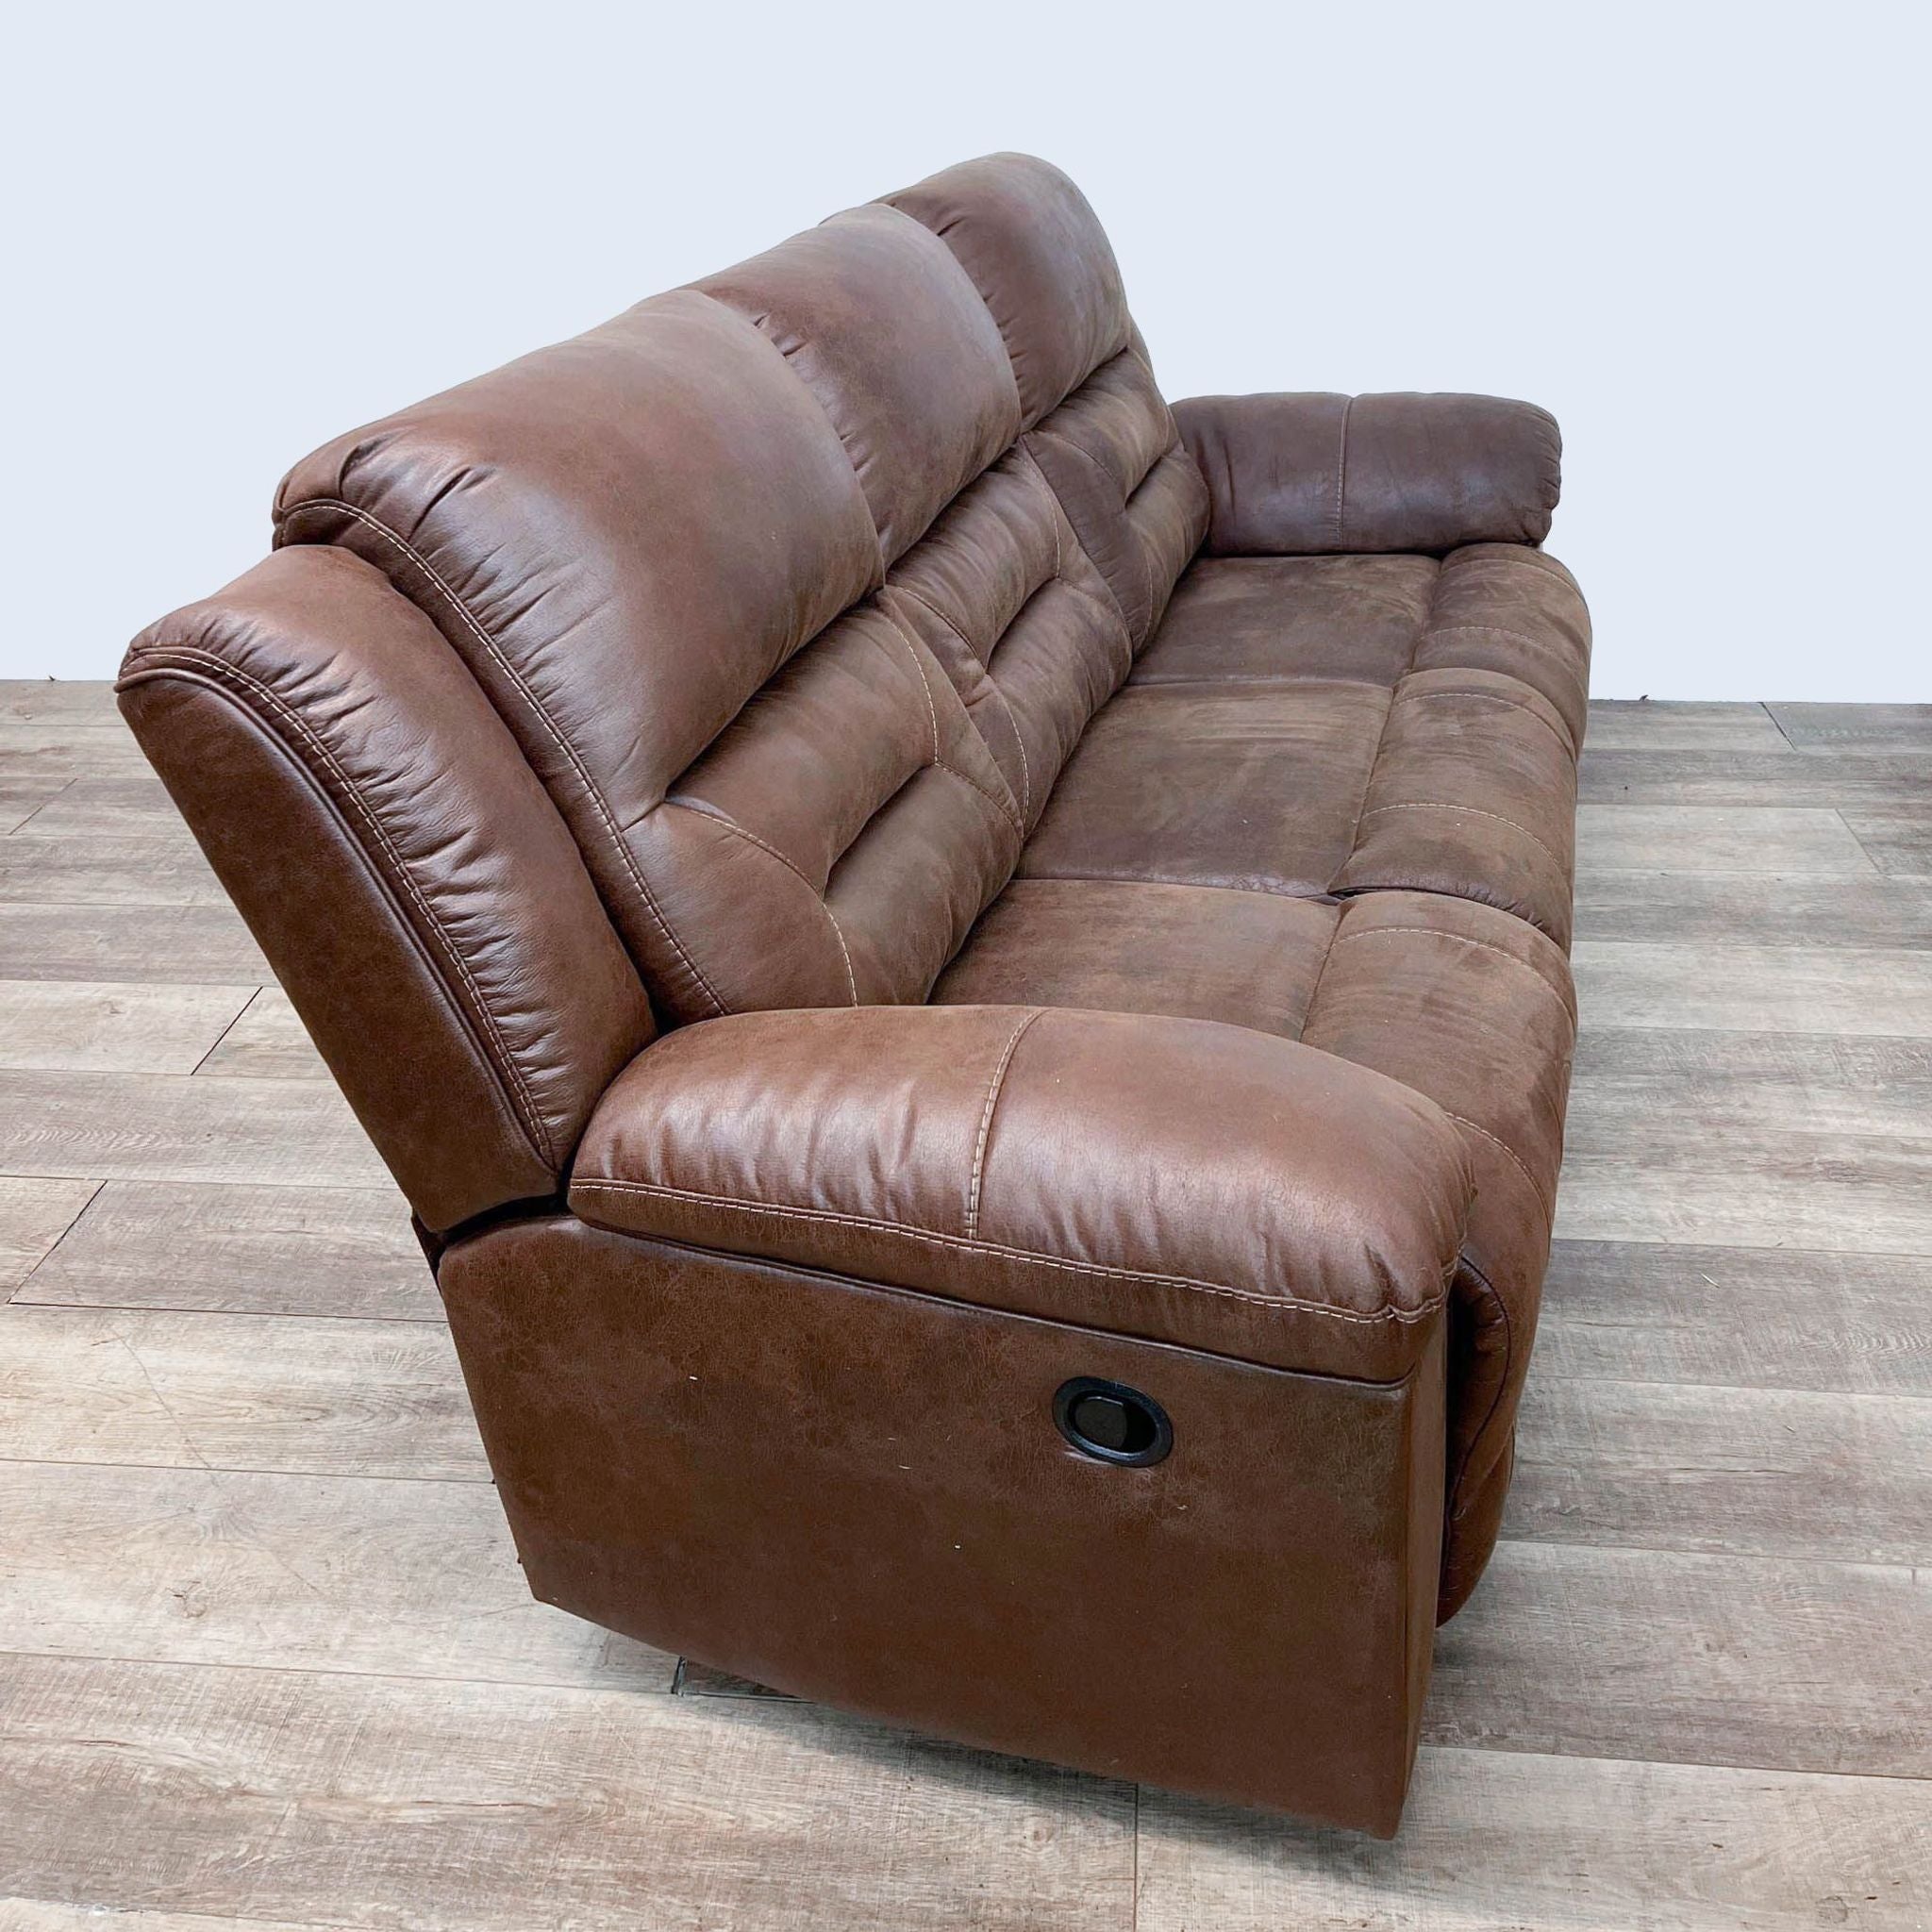 Saddle brown, leather-look, high-back Reperch 3-seat dual reclining sofa with pillow top arms on a wooden floor.